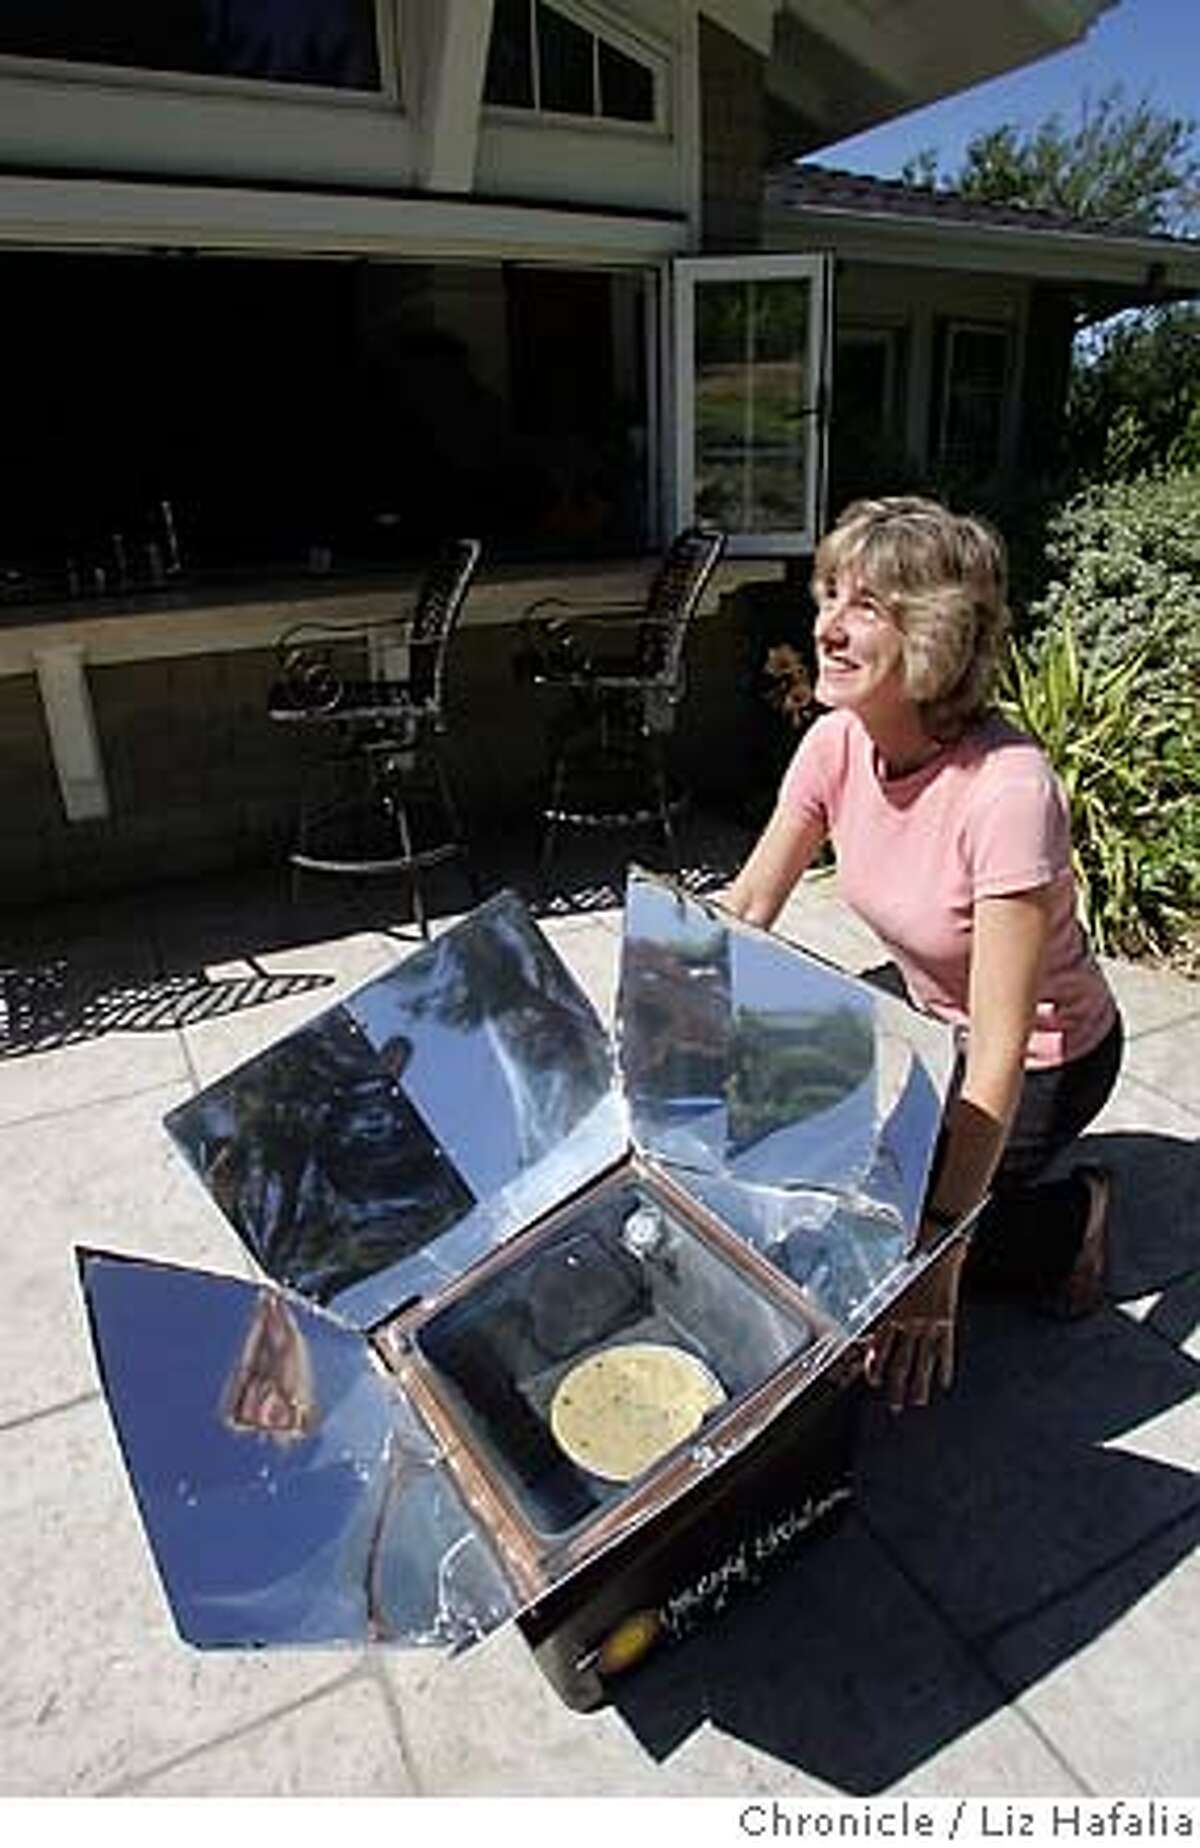 SOLAR27_LH_076.JPG Lynn Langford positions her solar oven for making her chocolate zucchini cake. Photographed by Liz Hafalia/The Chronicle/Ross/6/12/07 **Lynn Langford cq MANDATORY CREDIT FOR PHOTOGRAPHER AND SAN FRANCISCO CHRONICLE/NO SALES-MAGS OUT